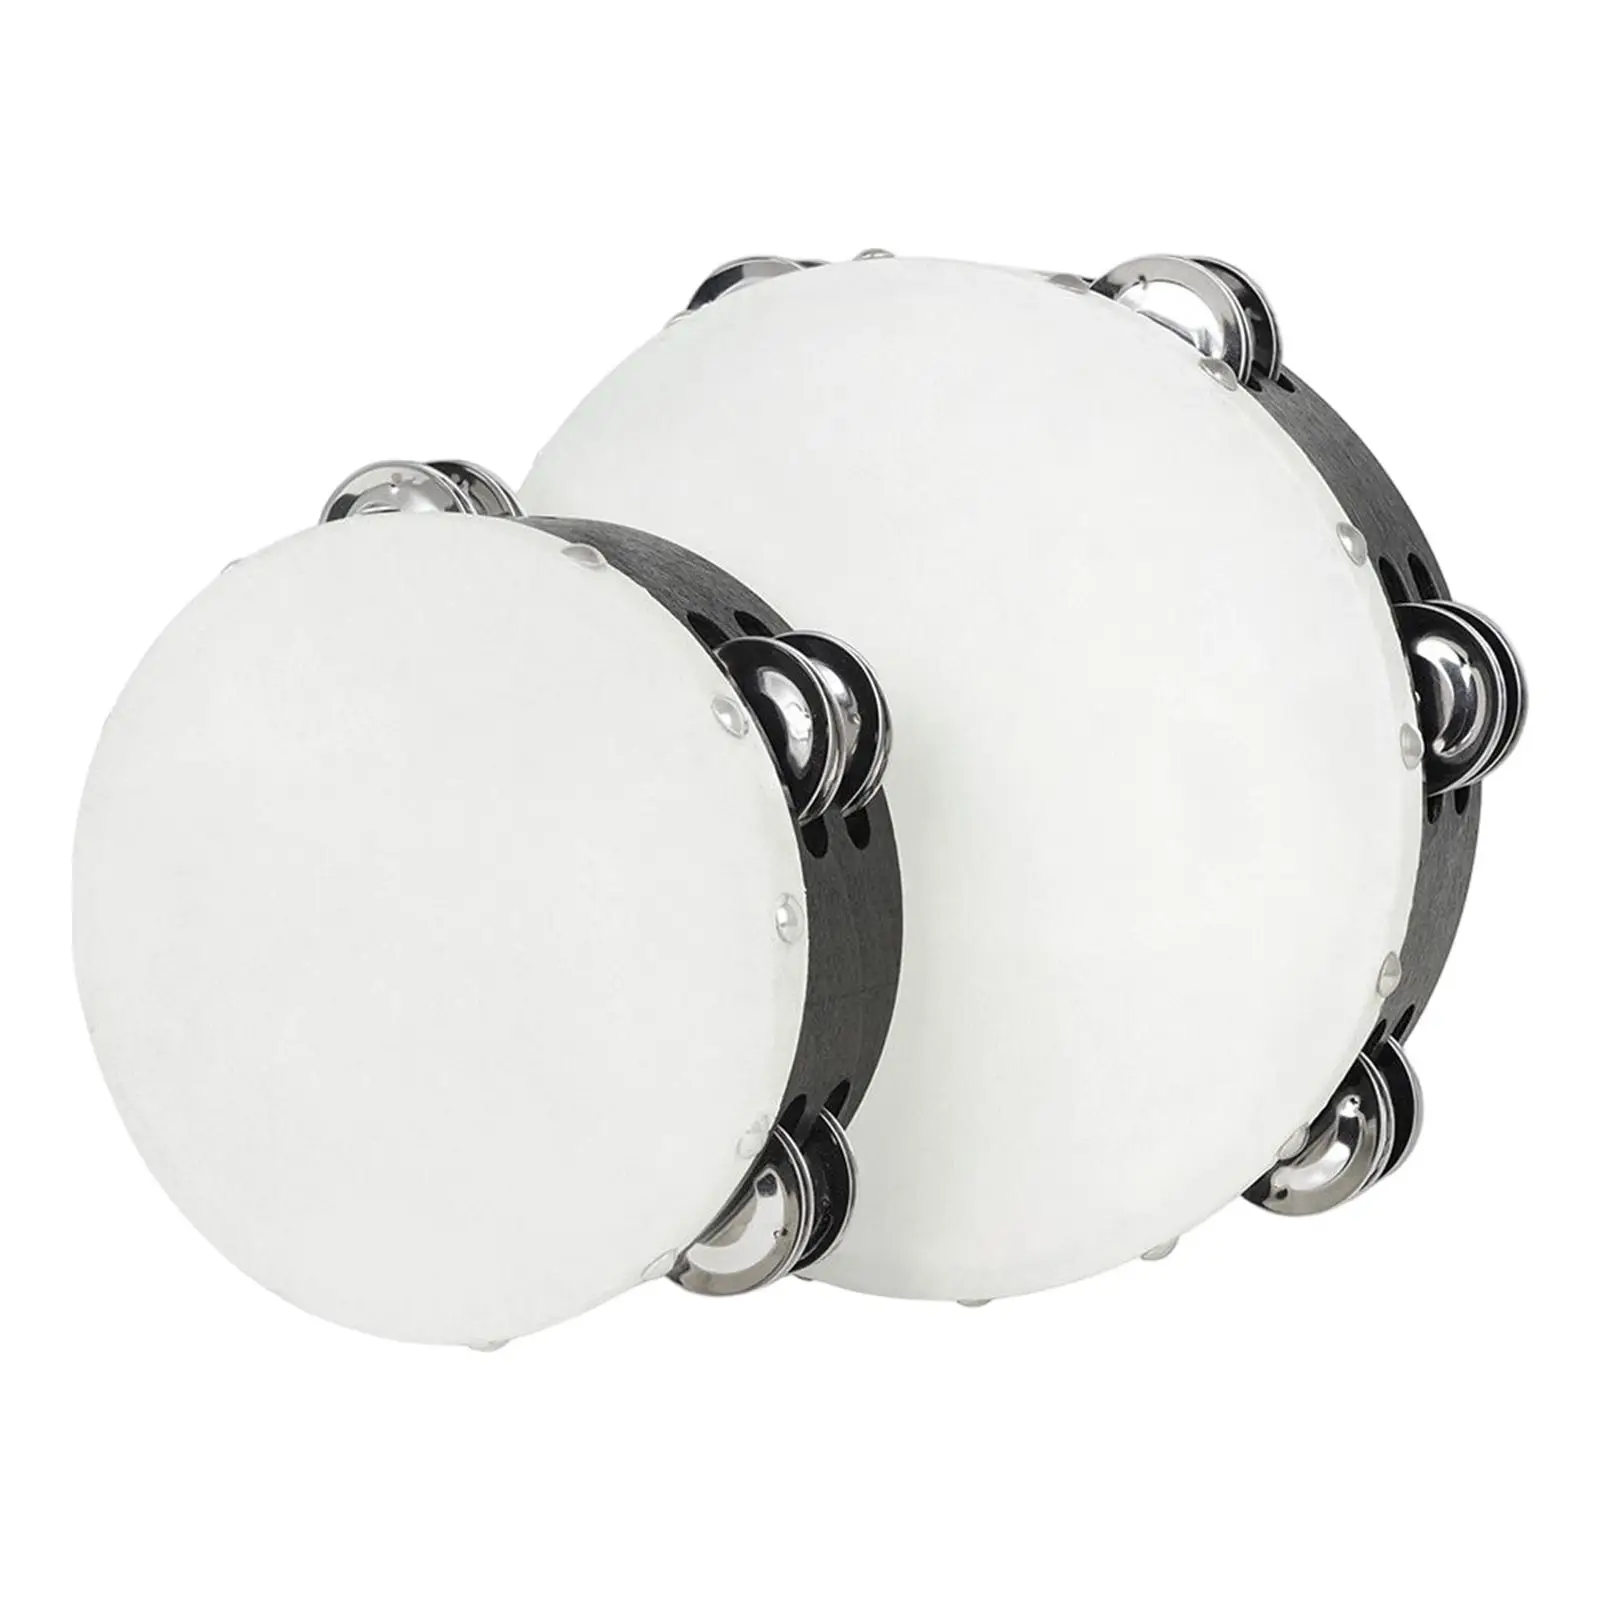 2x 8in 6in Double Tambourines Musical Instruments Manual Wooden Tambourine for Family Party Adults Church Kids